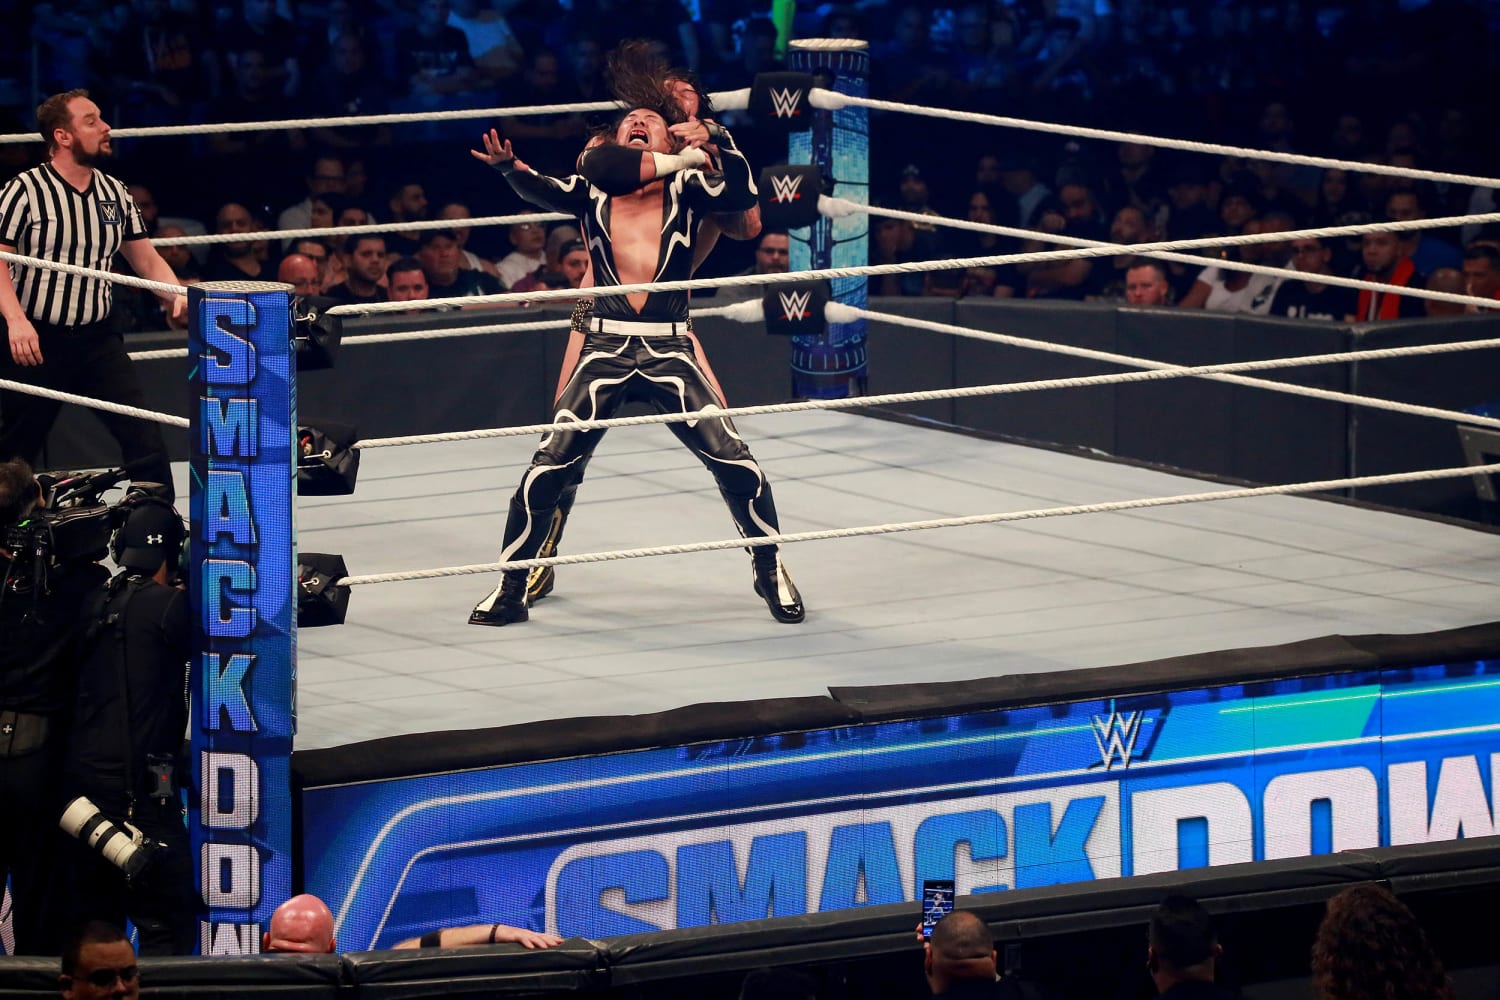 WWE SmackDown: Live Stream And TV Channel Info For WWE Show At The